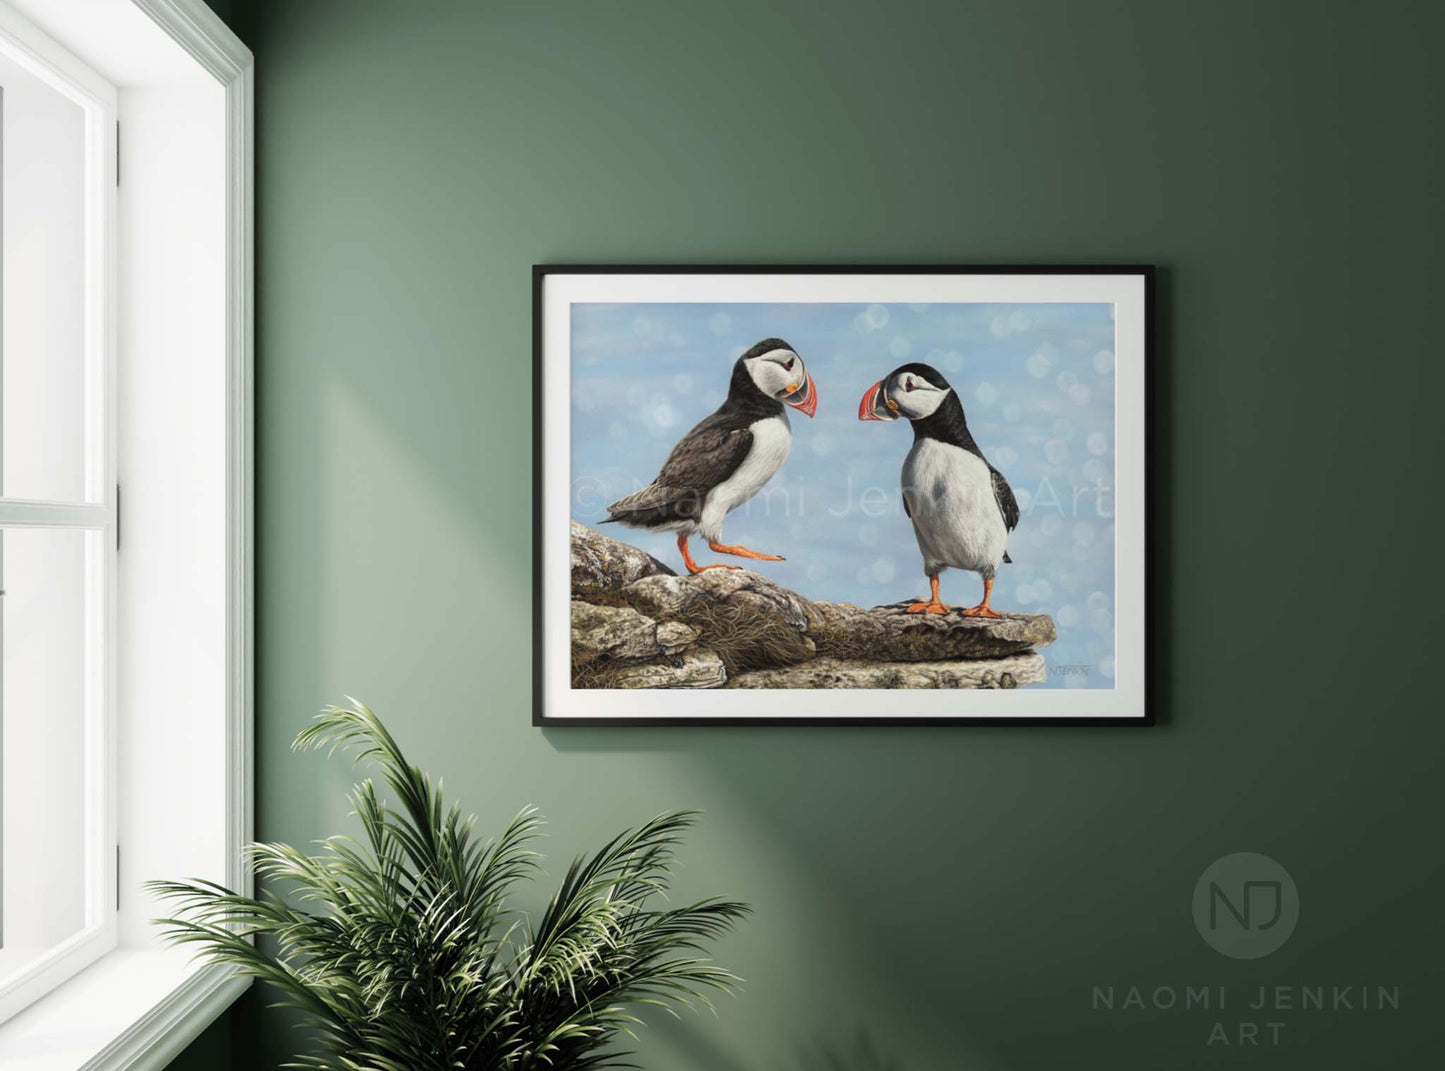 Puffin art print by Naomi Jenkin Art in a living space setting